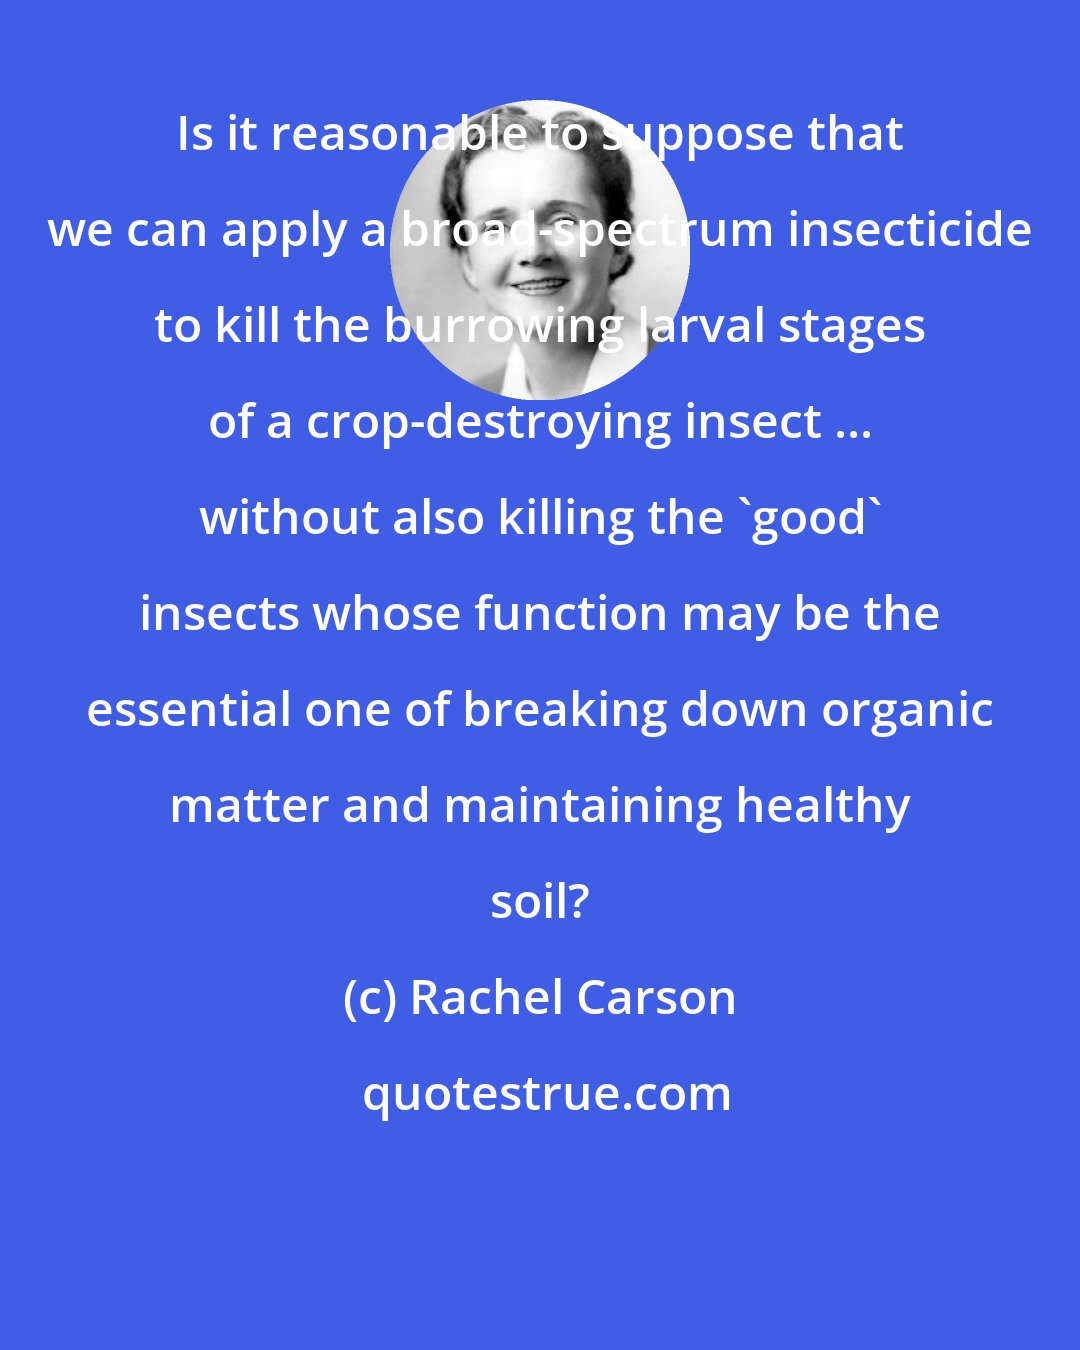 Rachel Carson: Is it reasonable to suppose that we can apply a broad-spectrum insecticide to kill the burrowing larval stages of a crop-destroying insect ... without also killing the 'good' insects whose function may be the essential one of breaking down organic matter and maintaining healthy soil?